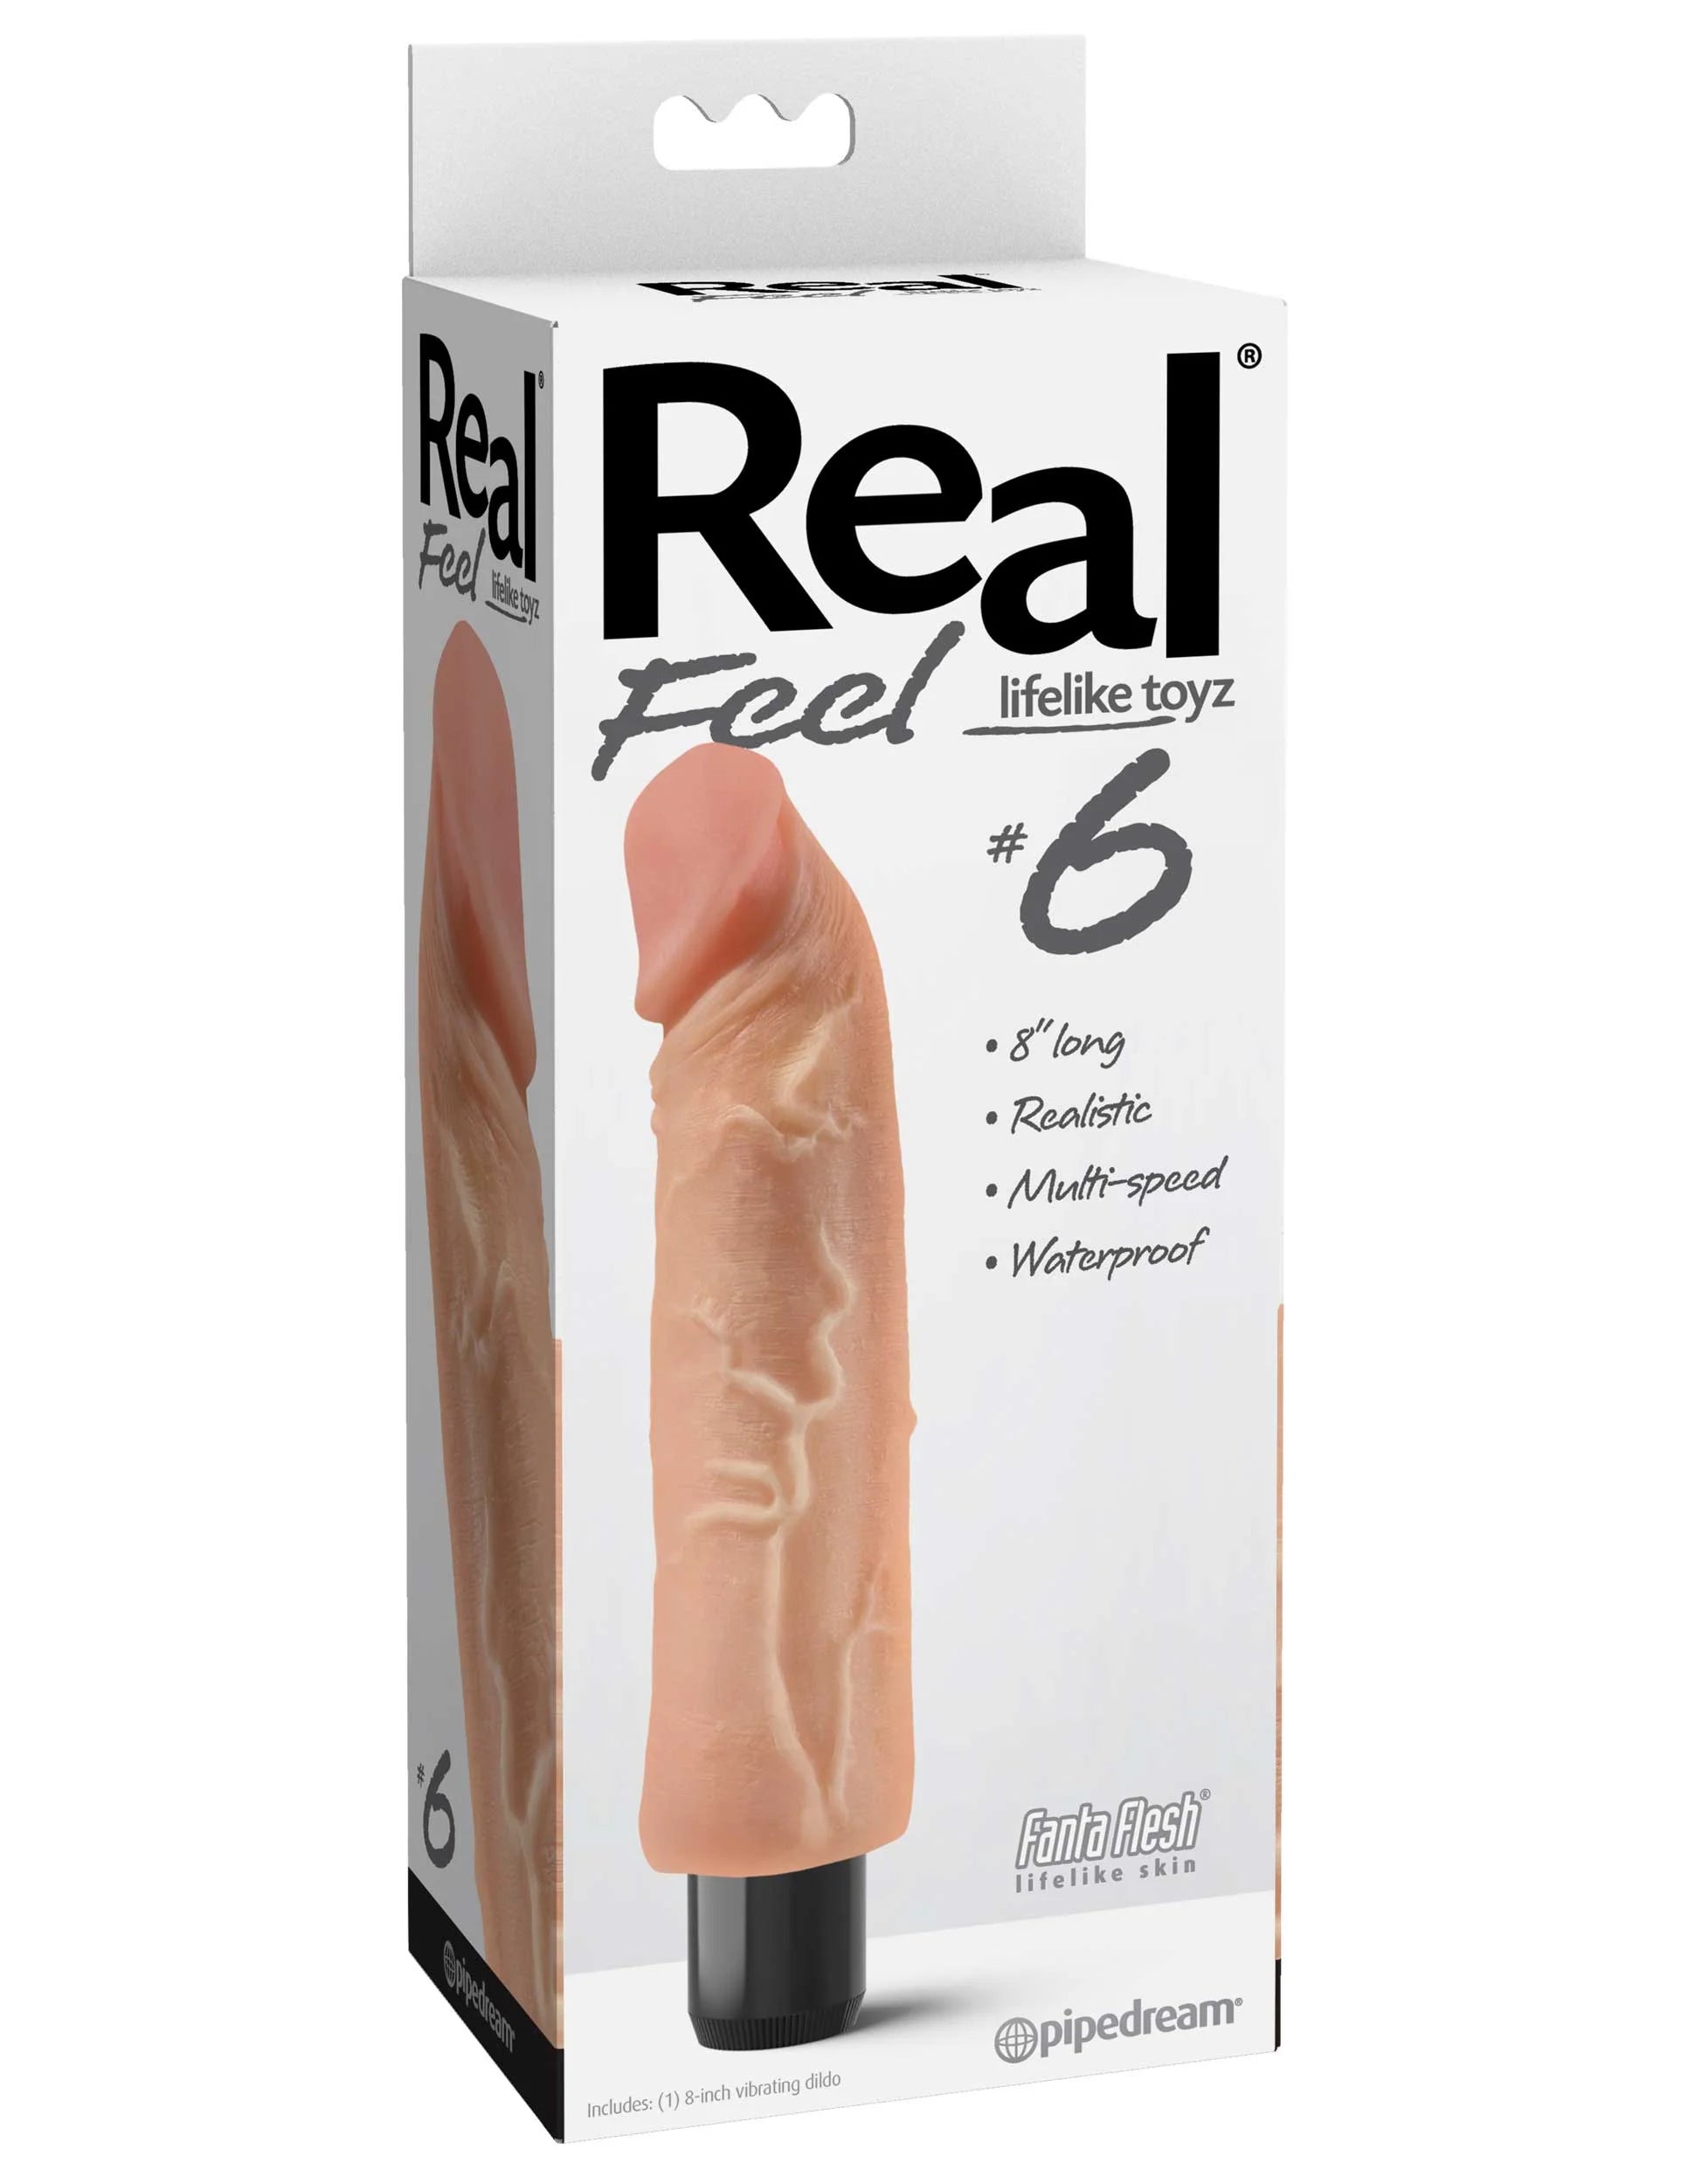 Pipedream Real Feel Lifelike Toyz No. 6 Realistic 8 in. Vibrating Dildo